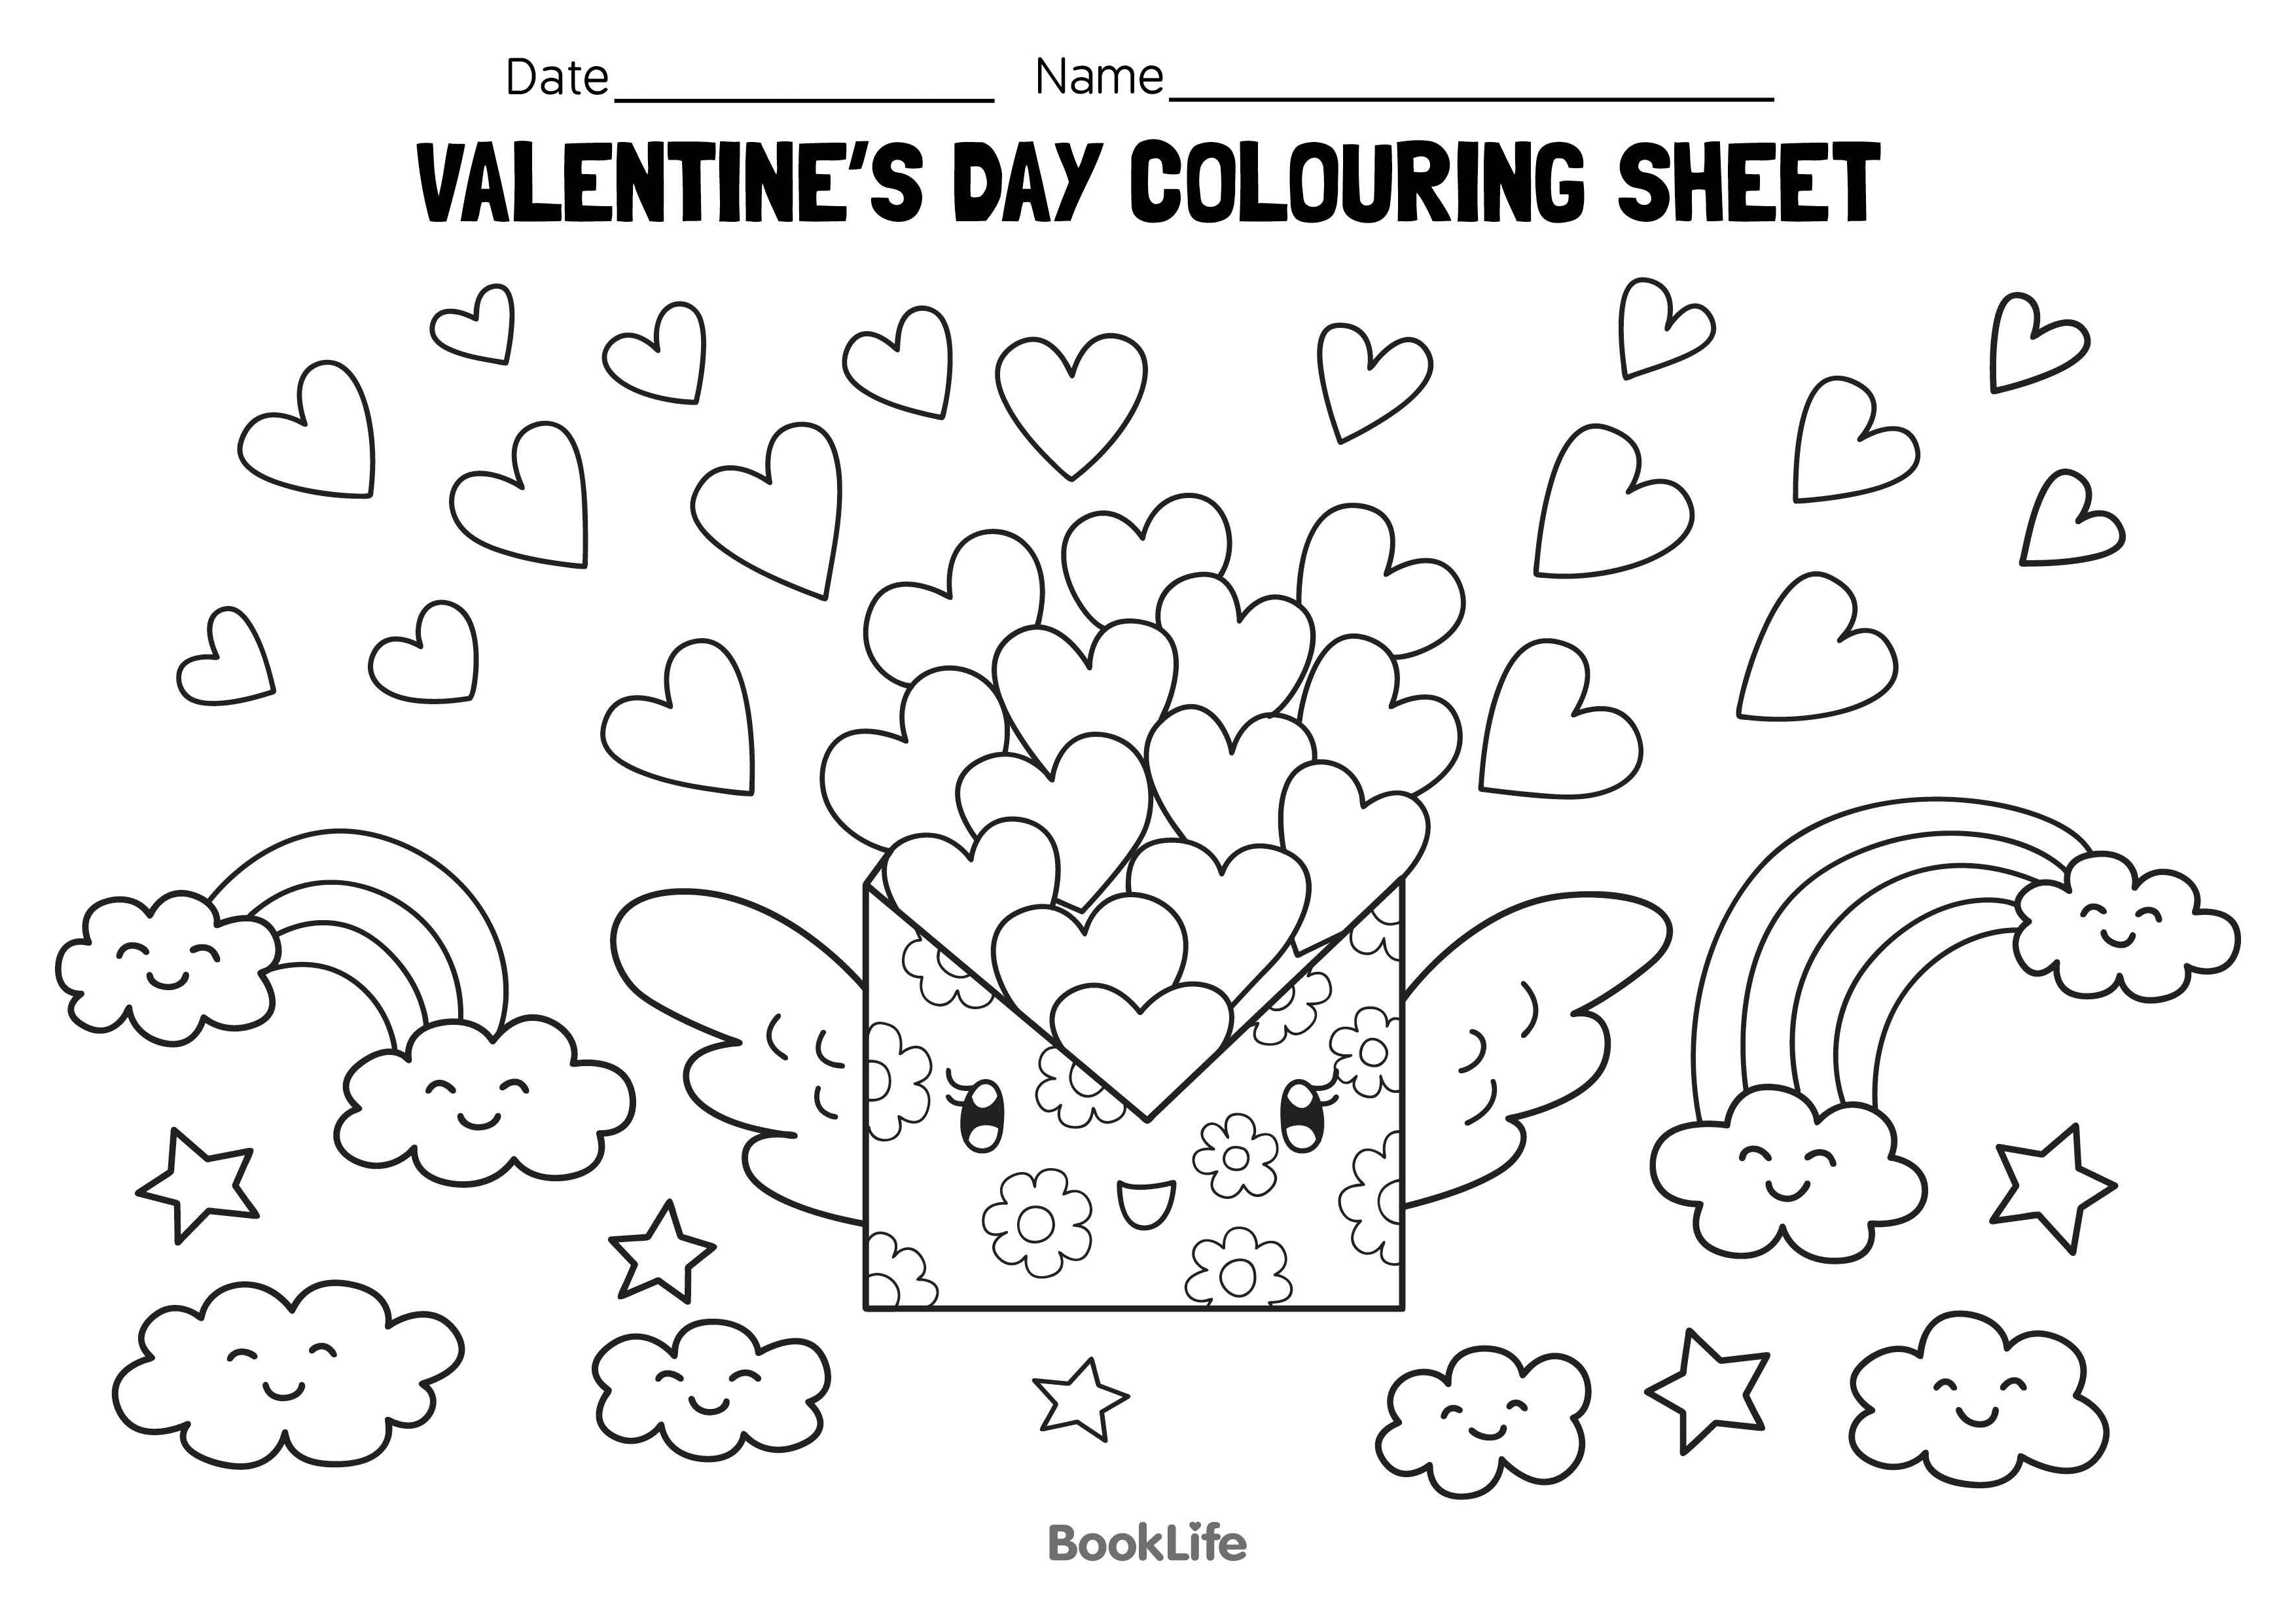 Valentine's Day Colouring Sheet